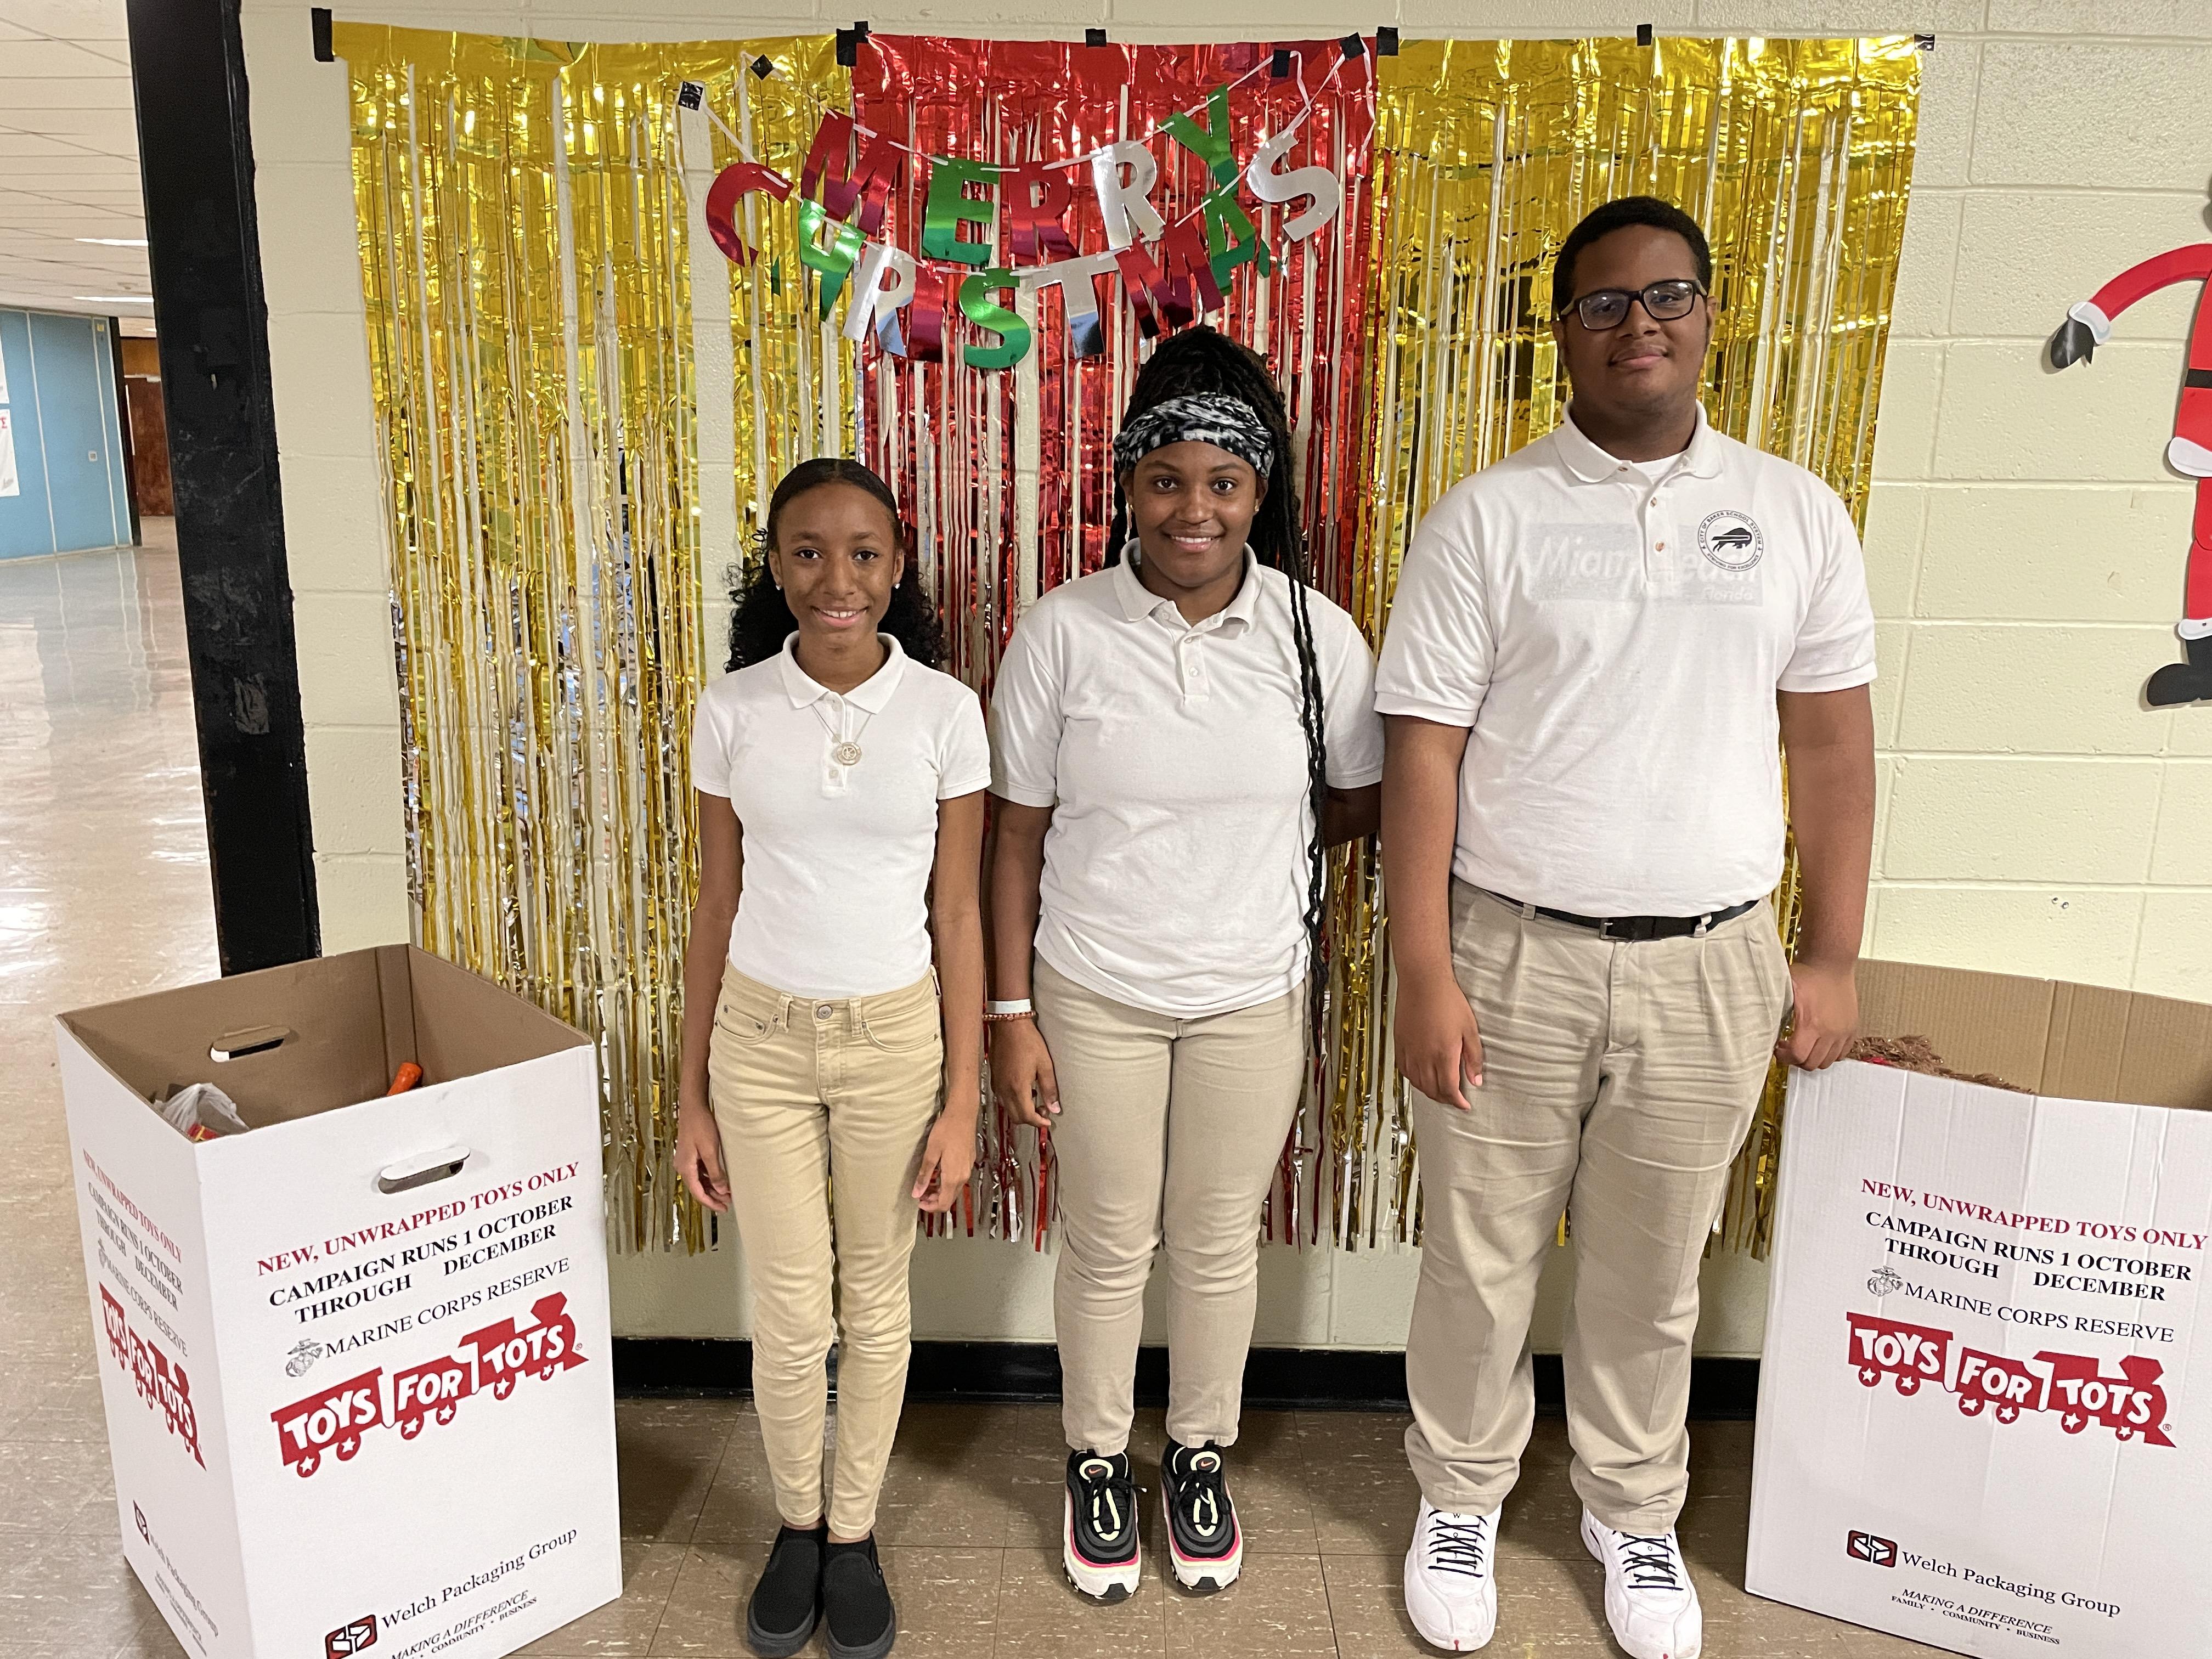 a photo of the Baker High School Freshman SGA Leaders who conducted a toy drive for "toys for tots"